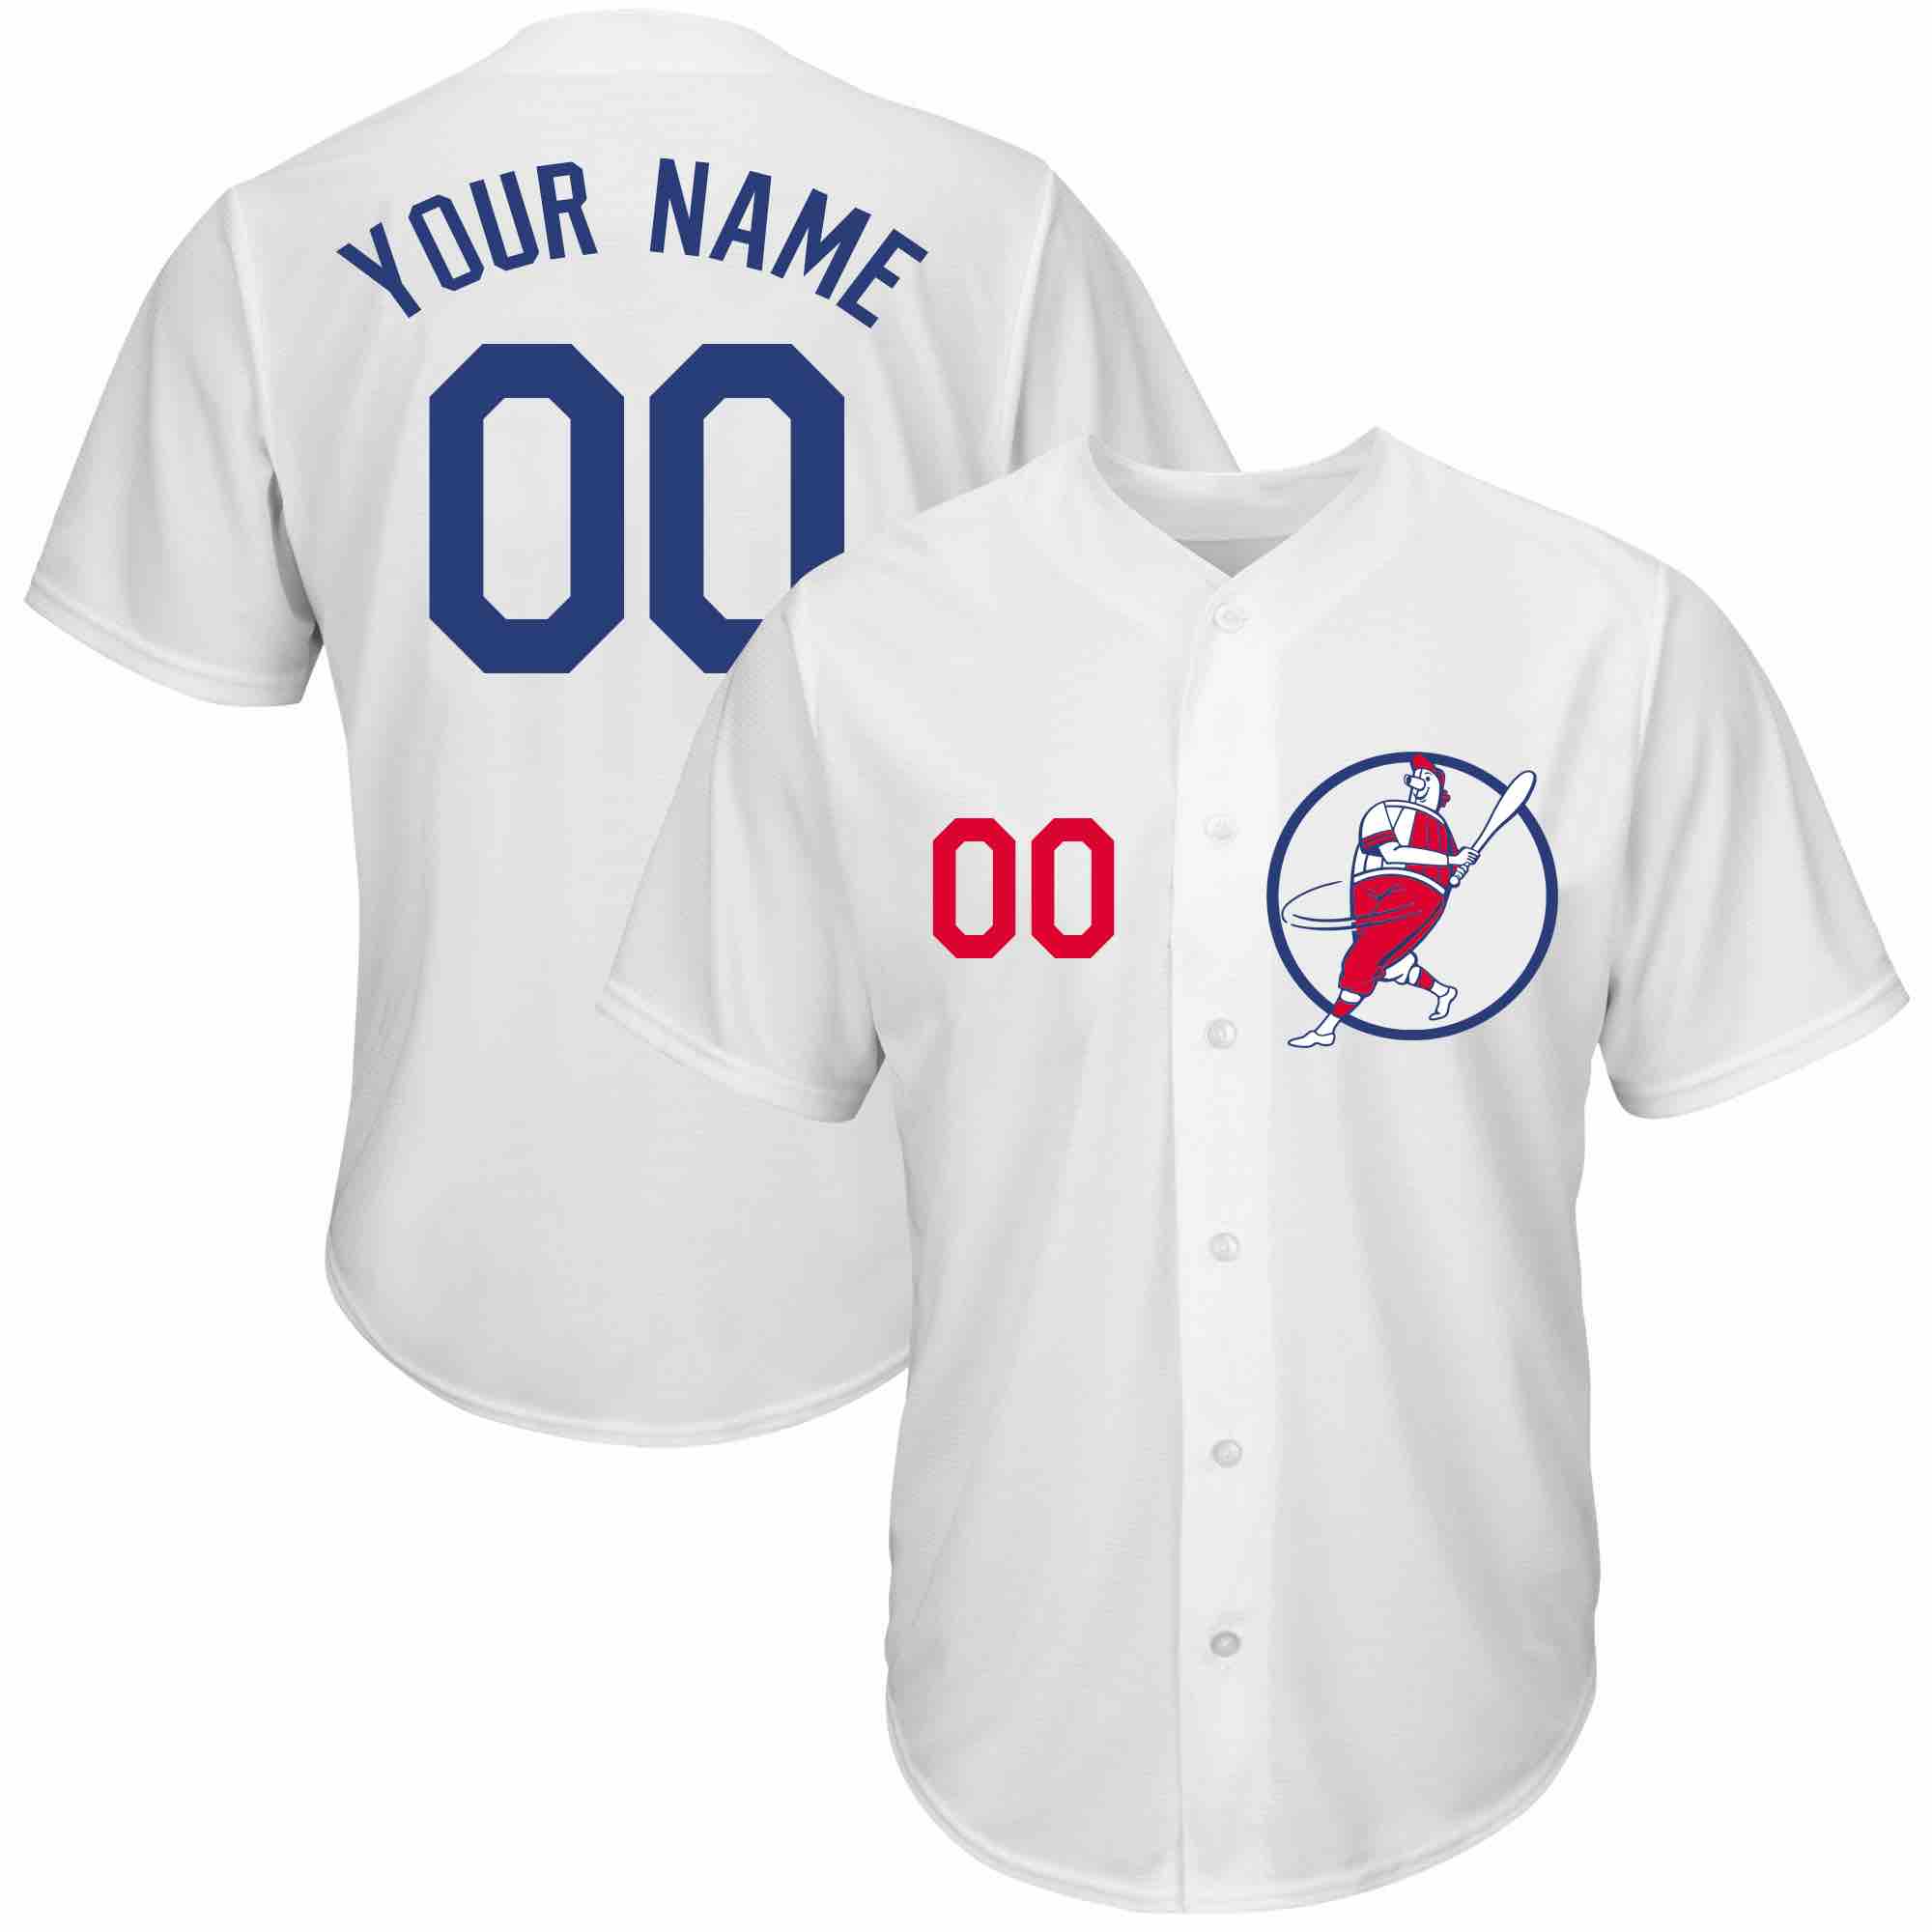 Womens MLB Los Angeles Dodgers Personalized White Jersey